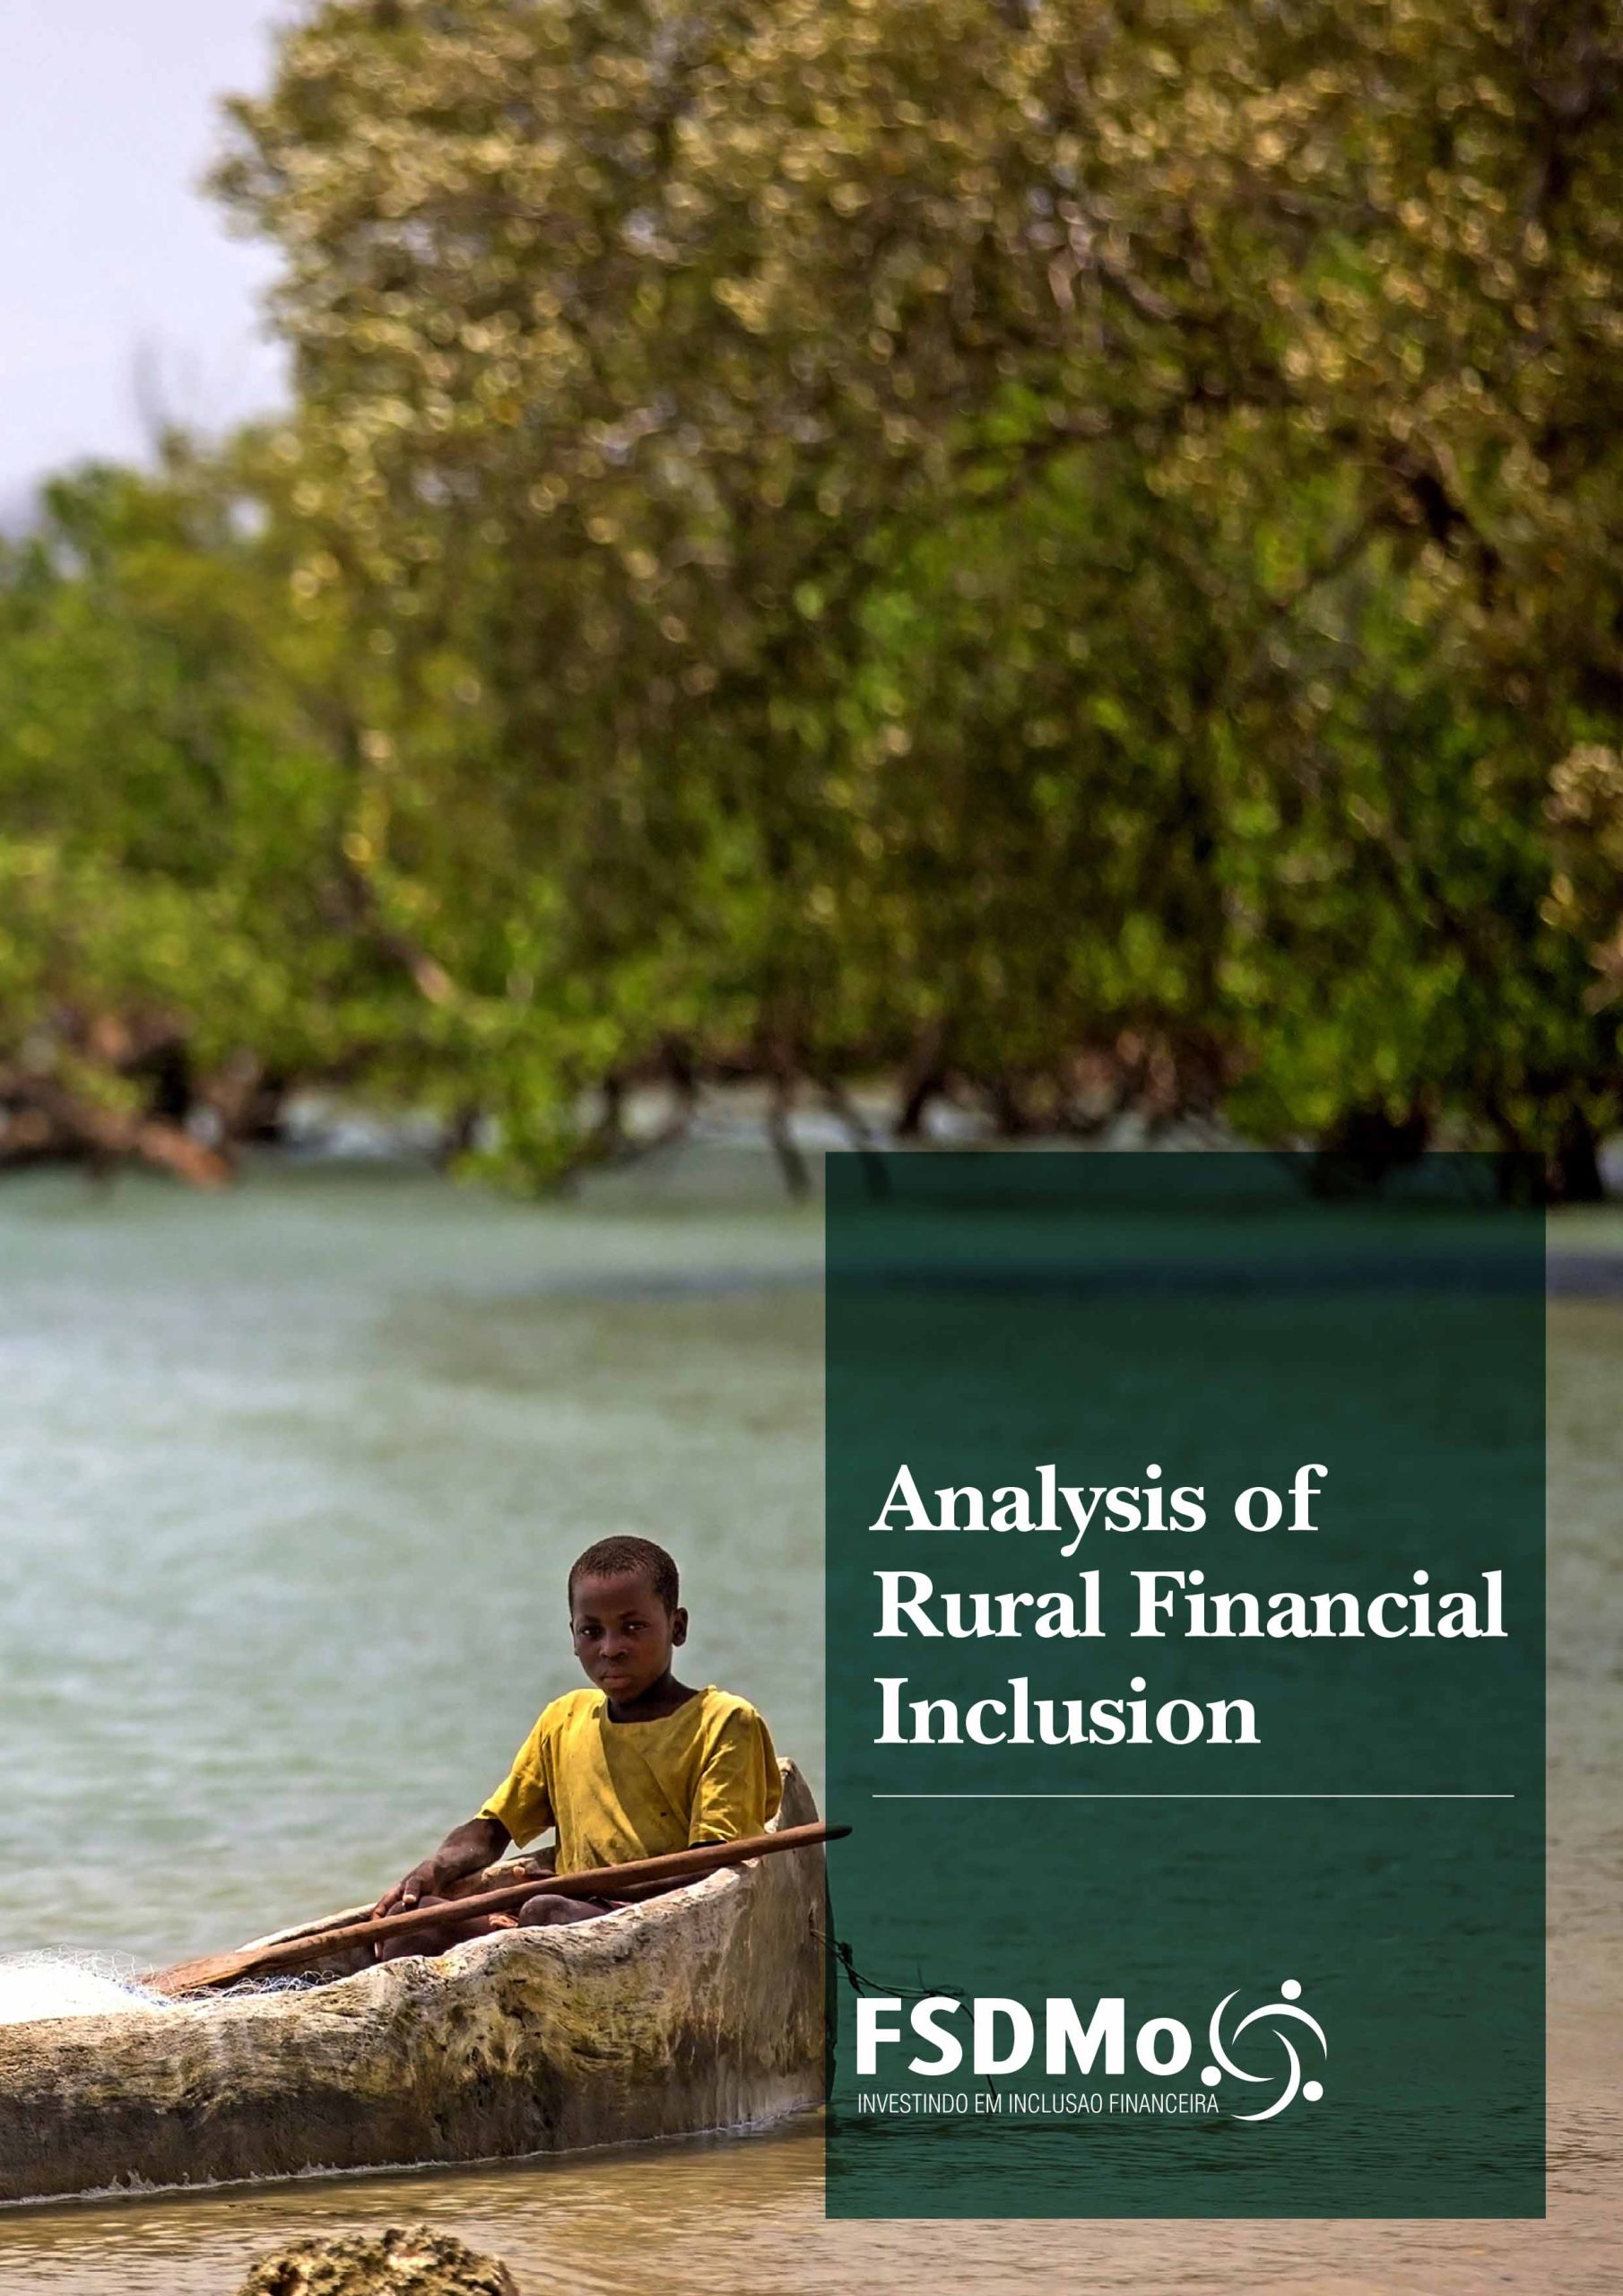 <!DOCTYPE html> <html lang="en"> <head>     <meta charset="UTF-8">     <meta name="viewport" content="width=device-width, initial-scale=1.0">     <title>ANALYSIS OF RURAL FINANCIAL INCLUSION</title>     <style>         a {             color: #8FC73F;             text-decoration: none; /* Remove underline */             transition: color 0.3s; /* Smooth transition for color change */         }          a:hover {             color: #ffffff; /* Change color to white on hover */         }     </style> </head> <body>     <p><a href="https://www.fsdmoc.org.mz/wp-content/uploads/2023/06/ANALYSIS_OF_RURAL_FINANCIAL_INCLUSION.pdf" target="_blank">ANALYSIS OF RURAL FINANCIAL INCLUSION</a></p> </body> </html>